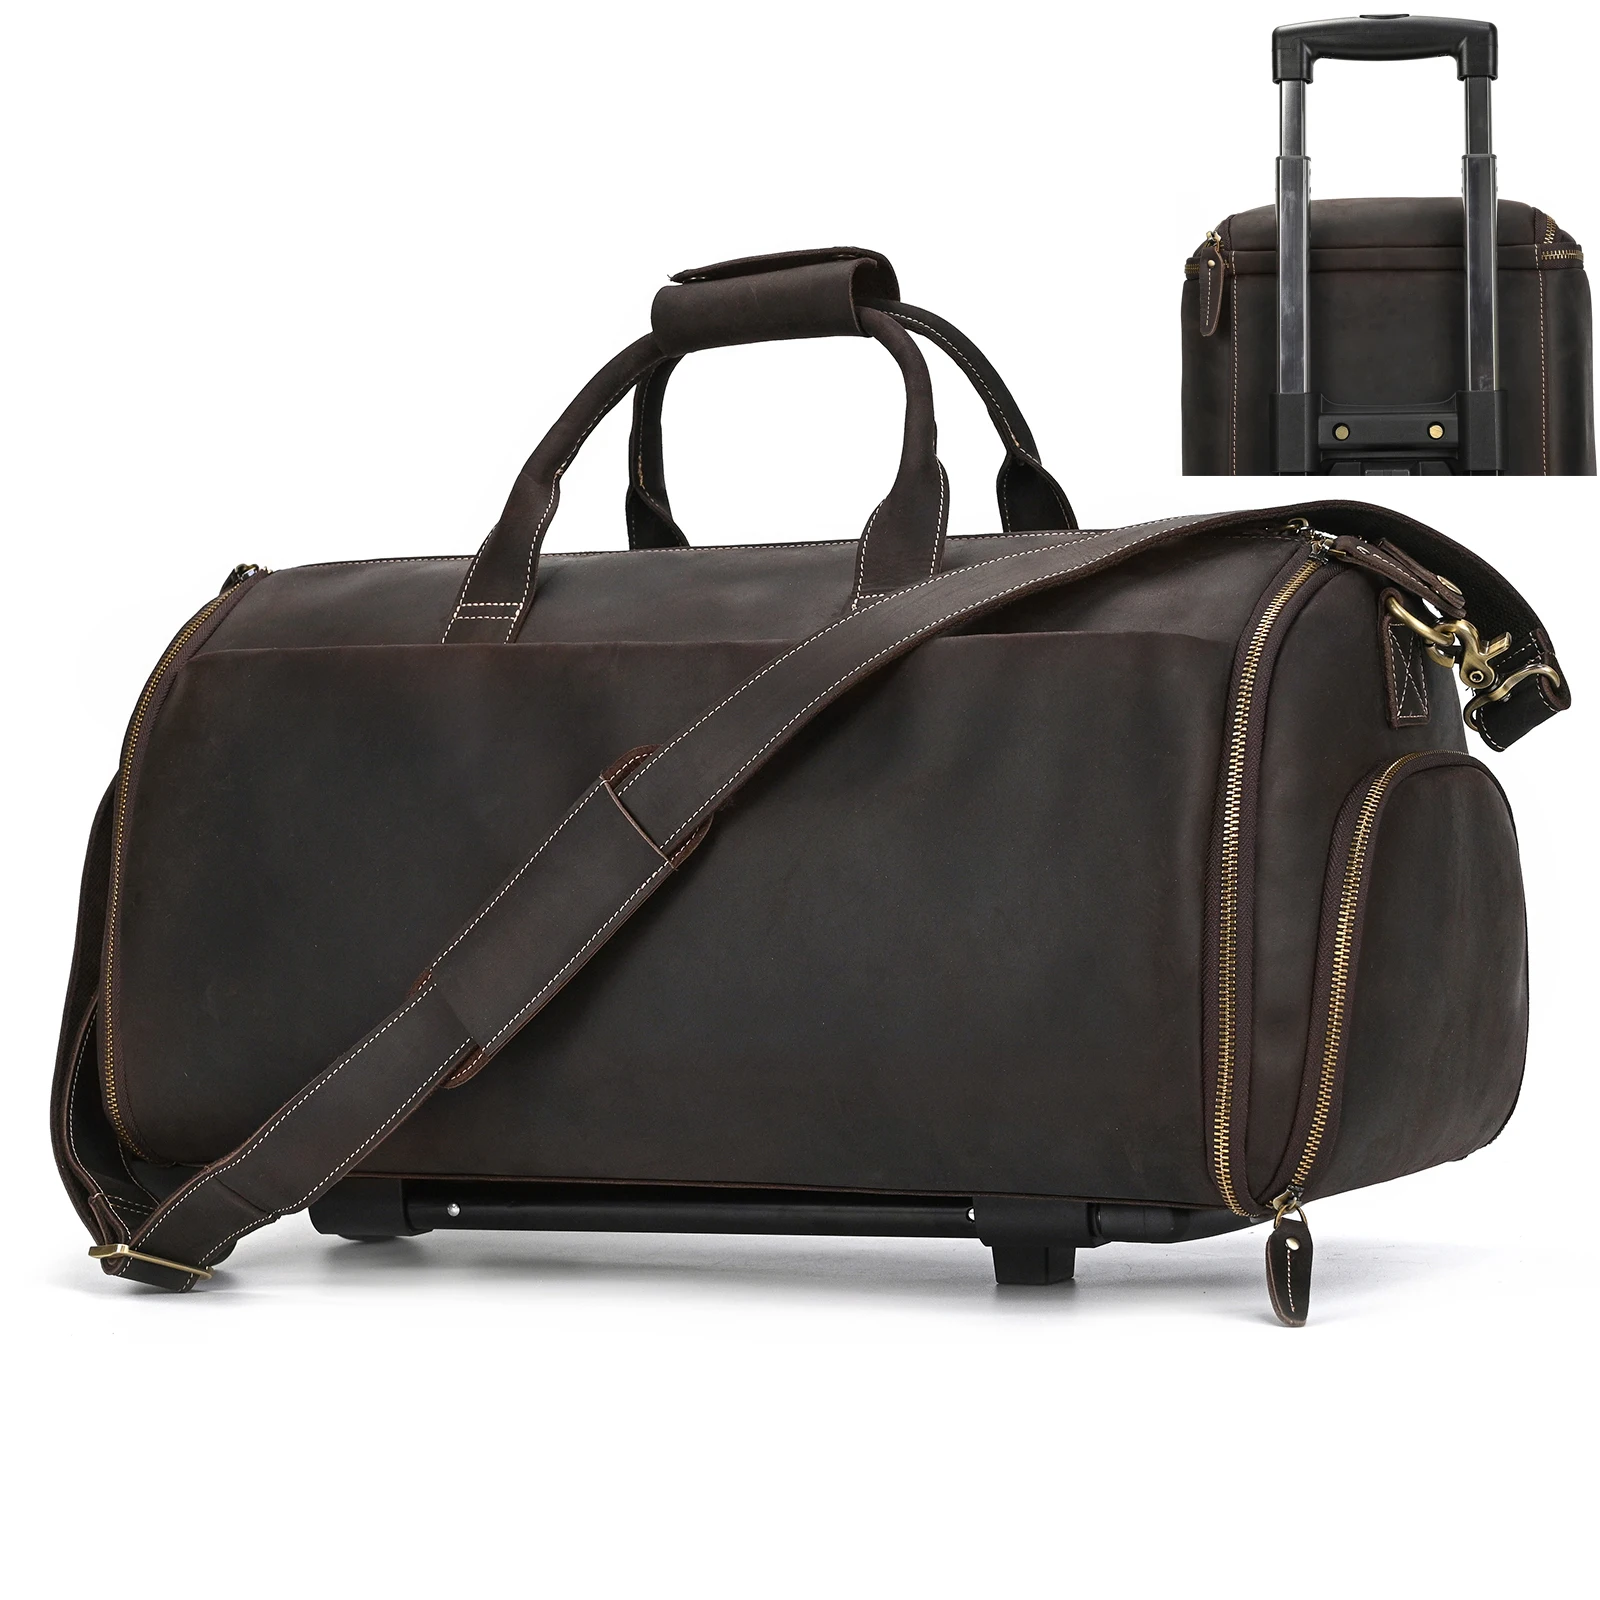 

Genuine Leather Luggage Bag For Suits Trolley Bag For Travelling Handbag Men Male Business Weekend Bag With Wheels Travel Bag